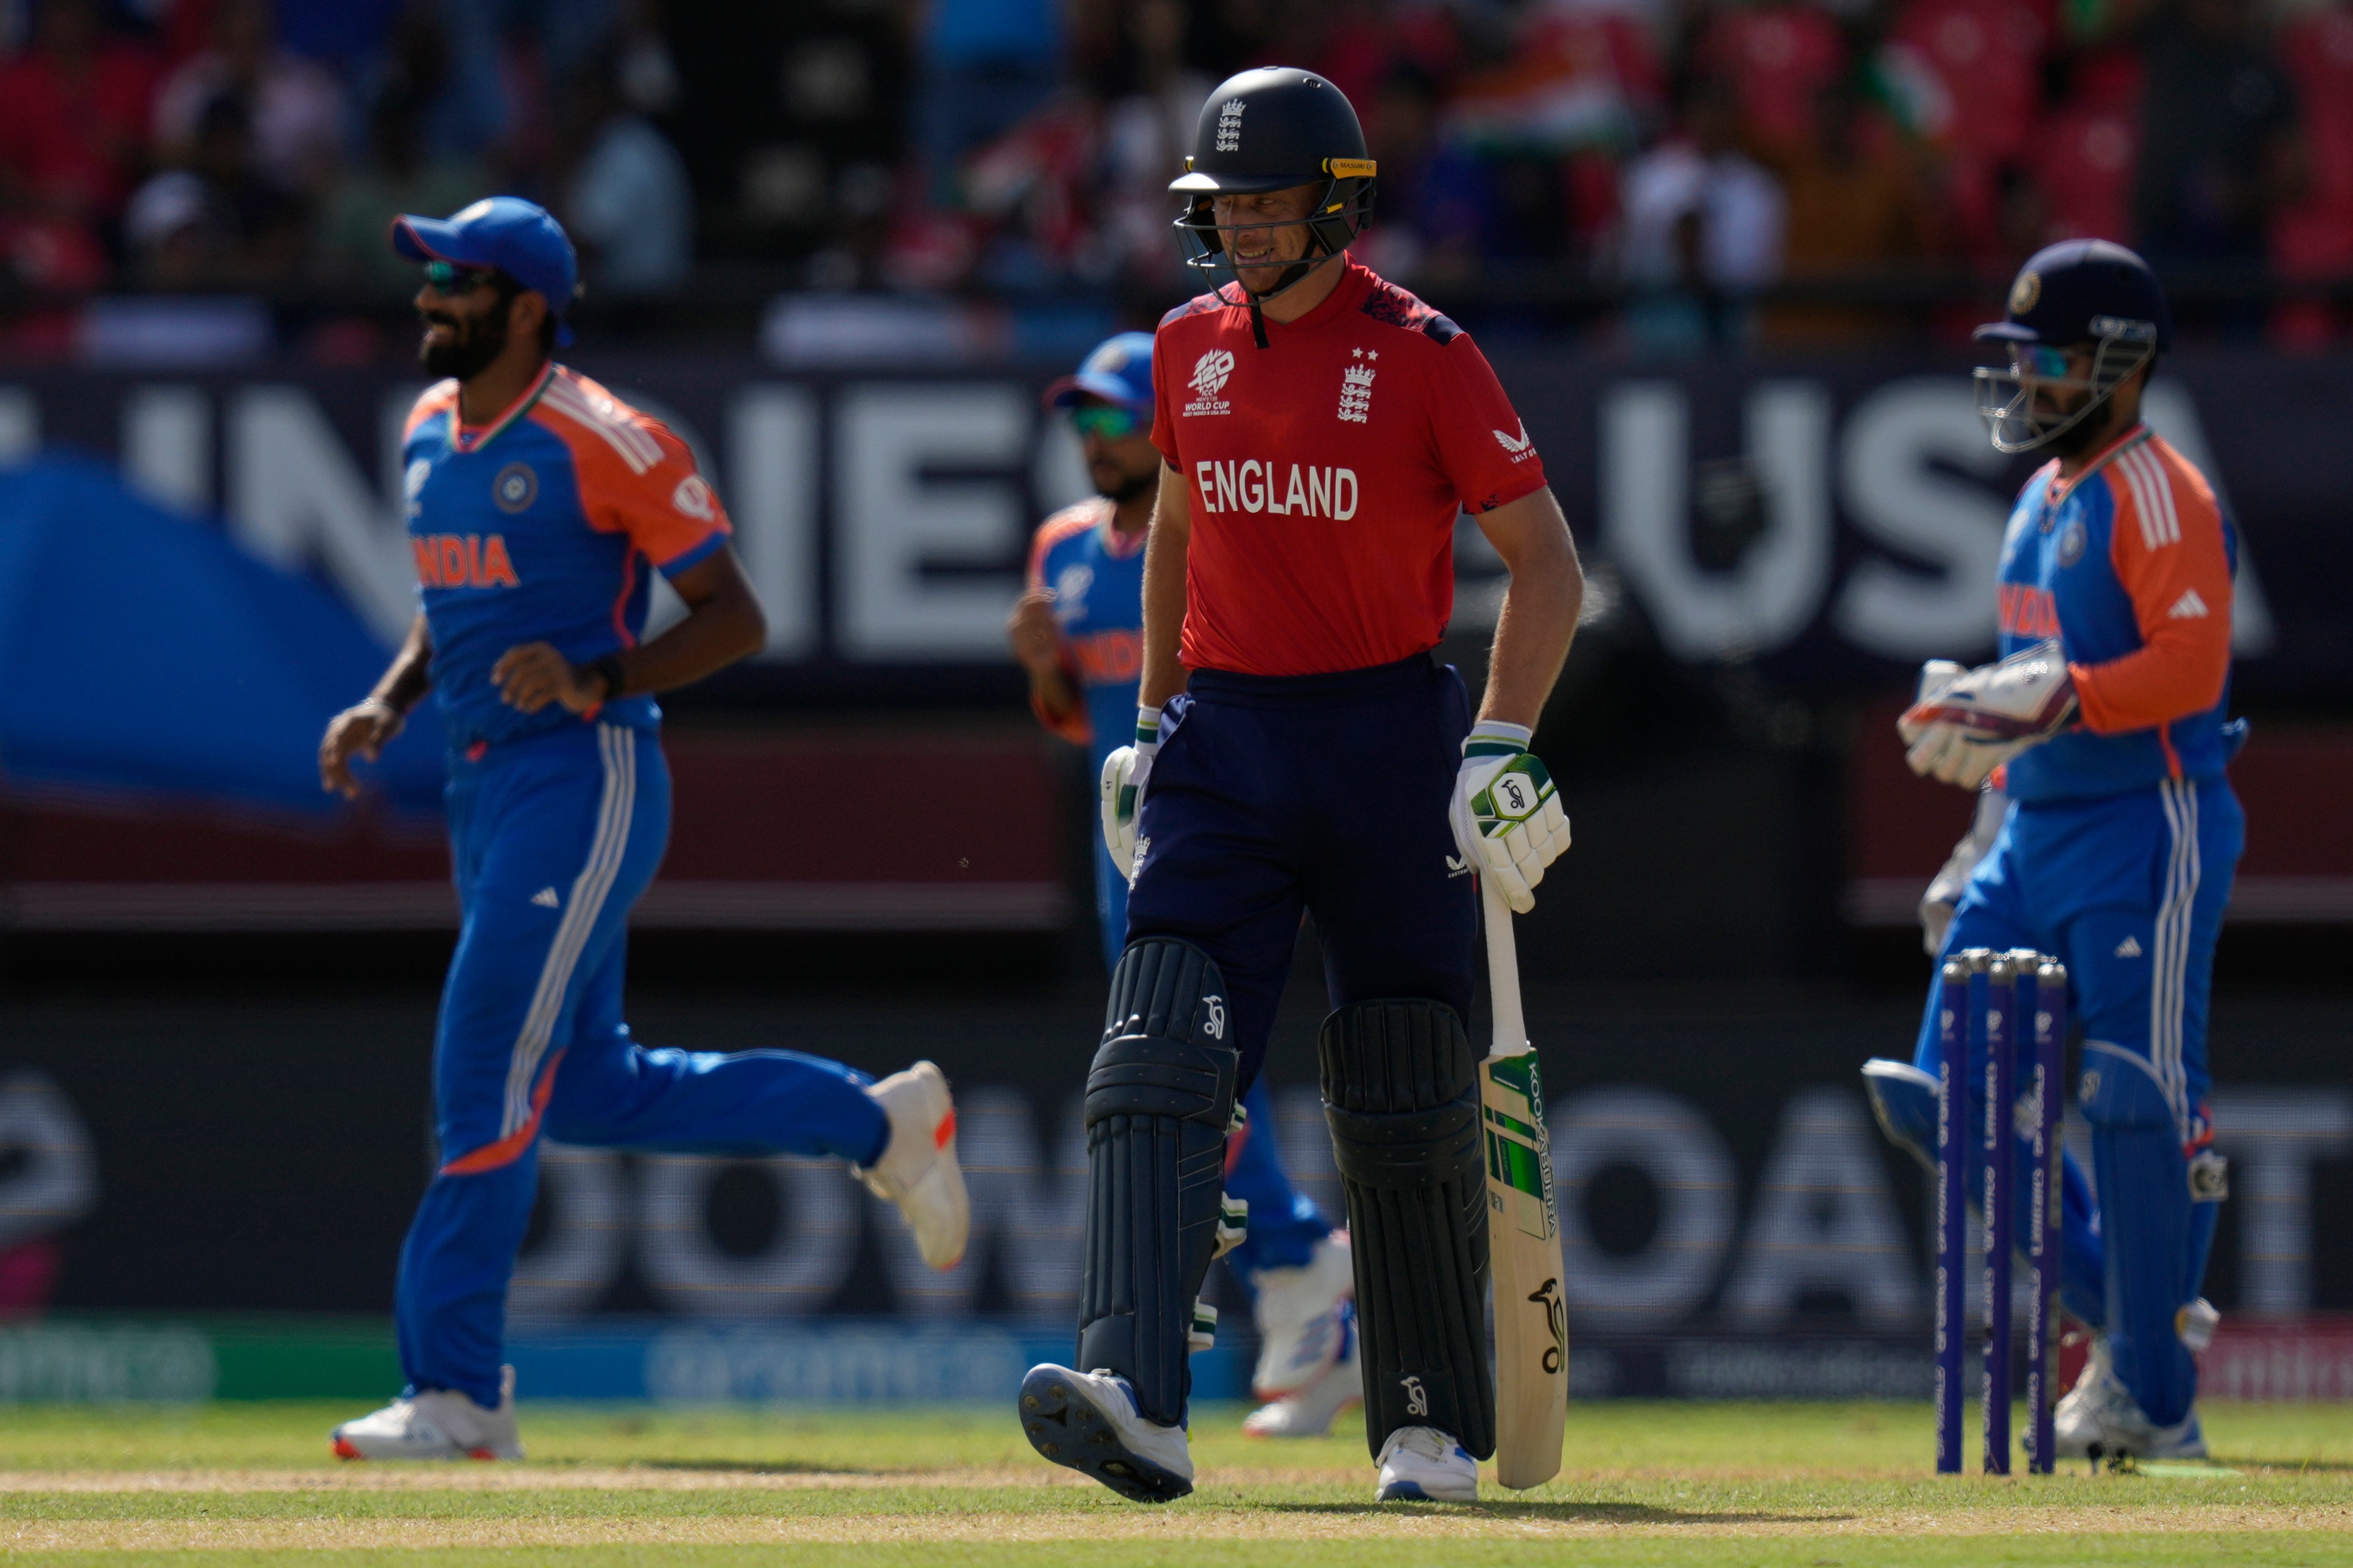 Jos Buttler was out early as England collapsed in run chase